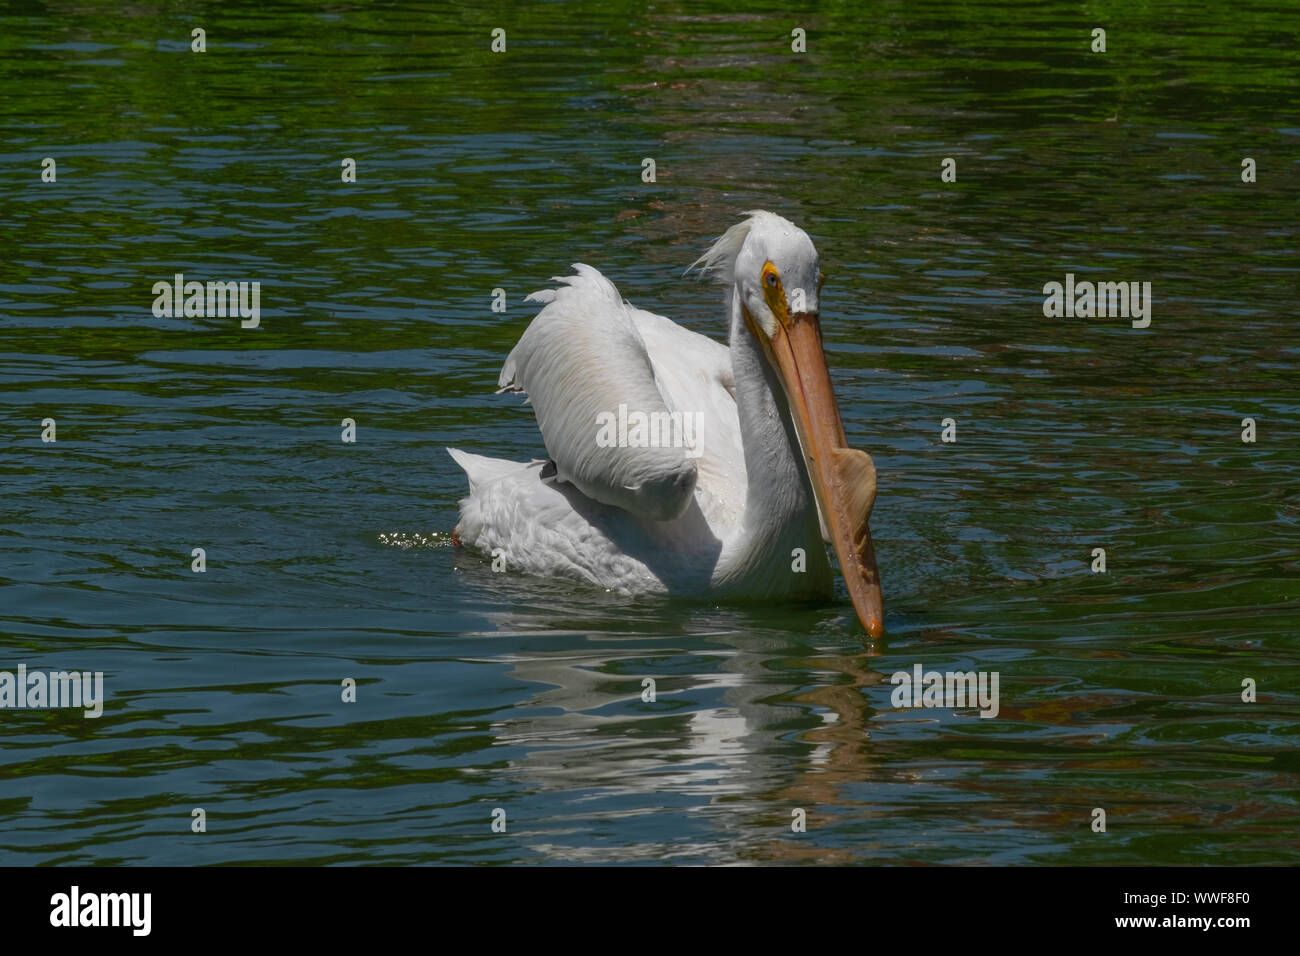 A serene pelican floats in a calm pond. Stock Photo